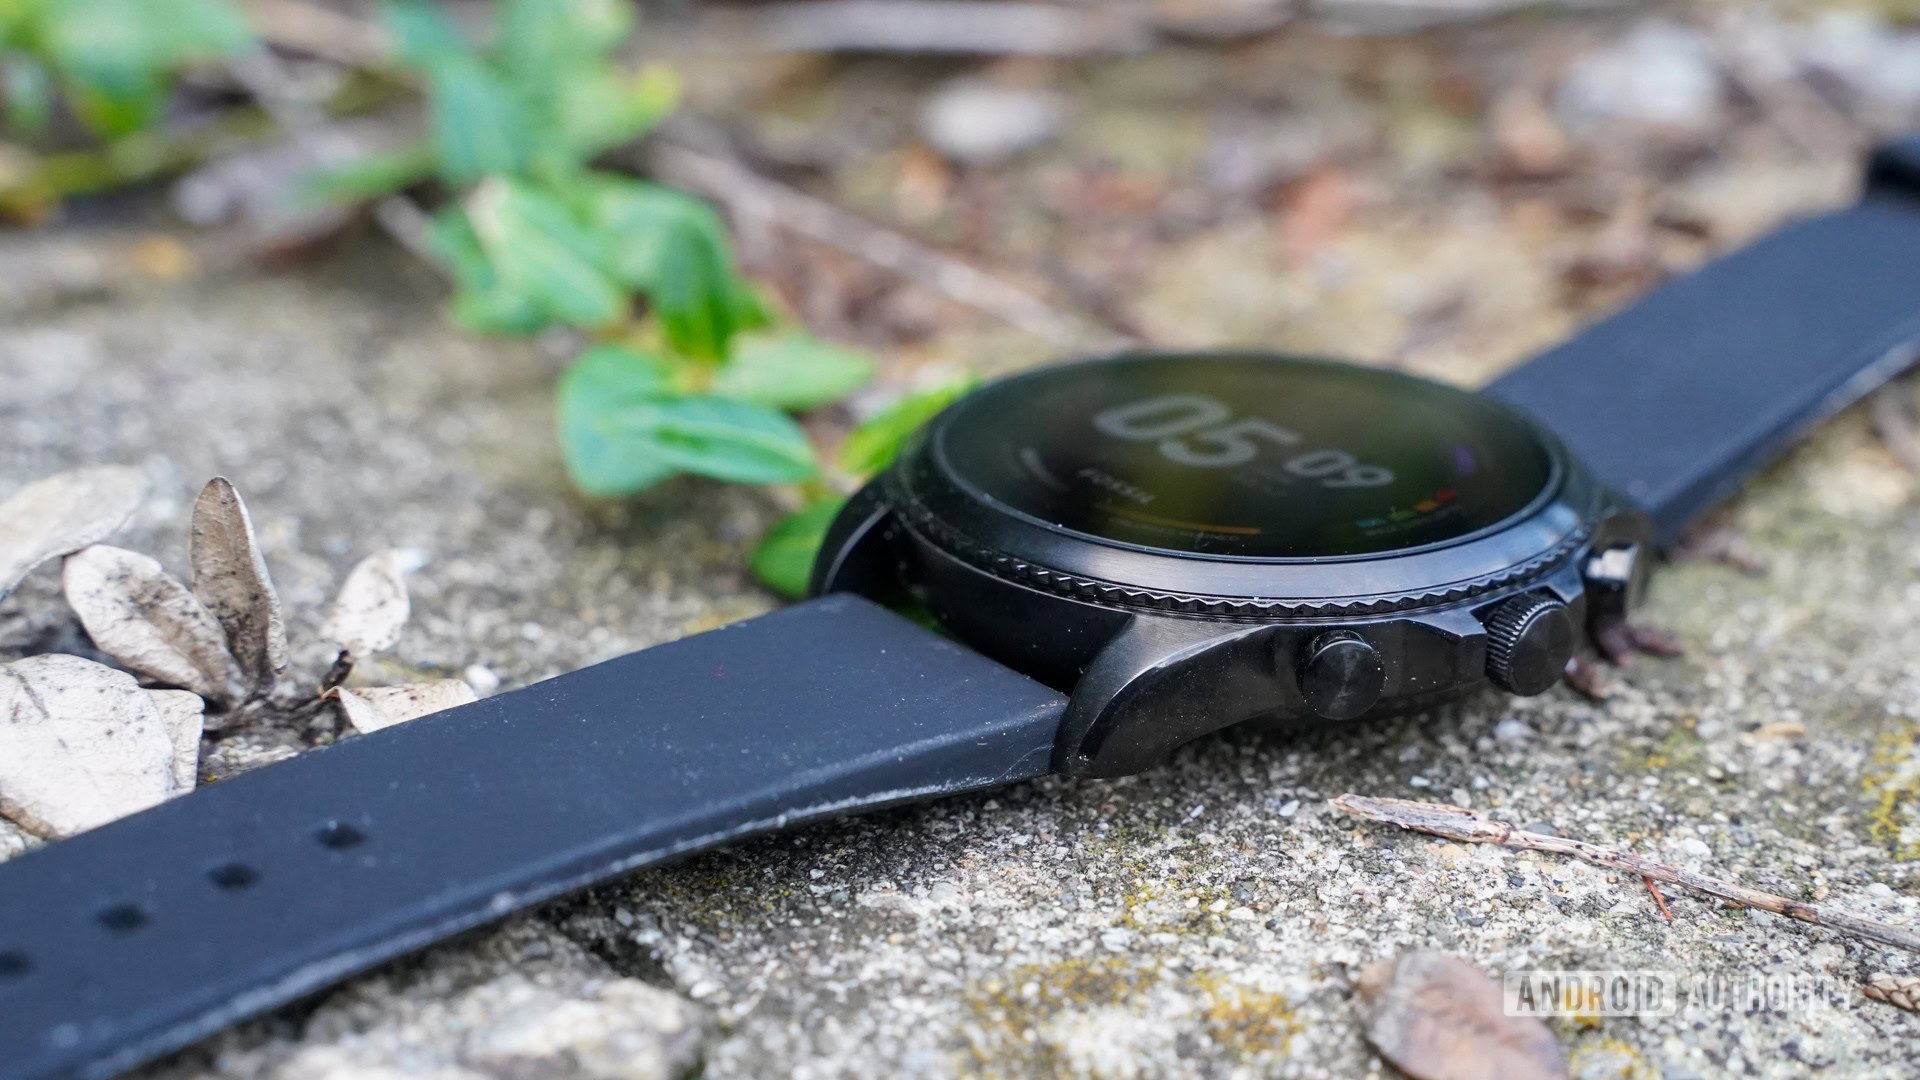 OS review: 3 here Fossil finally is Wear Gen 6